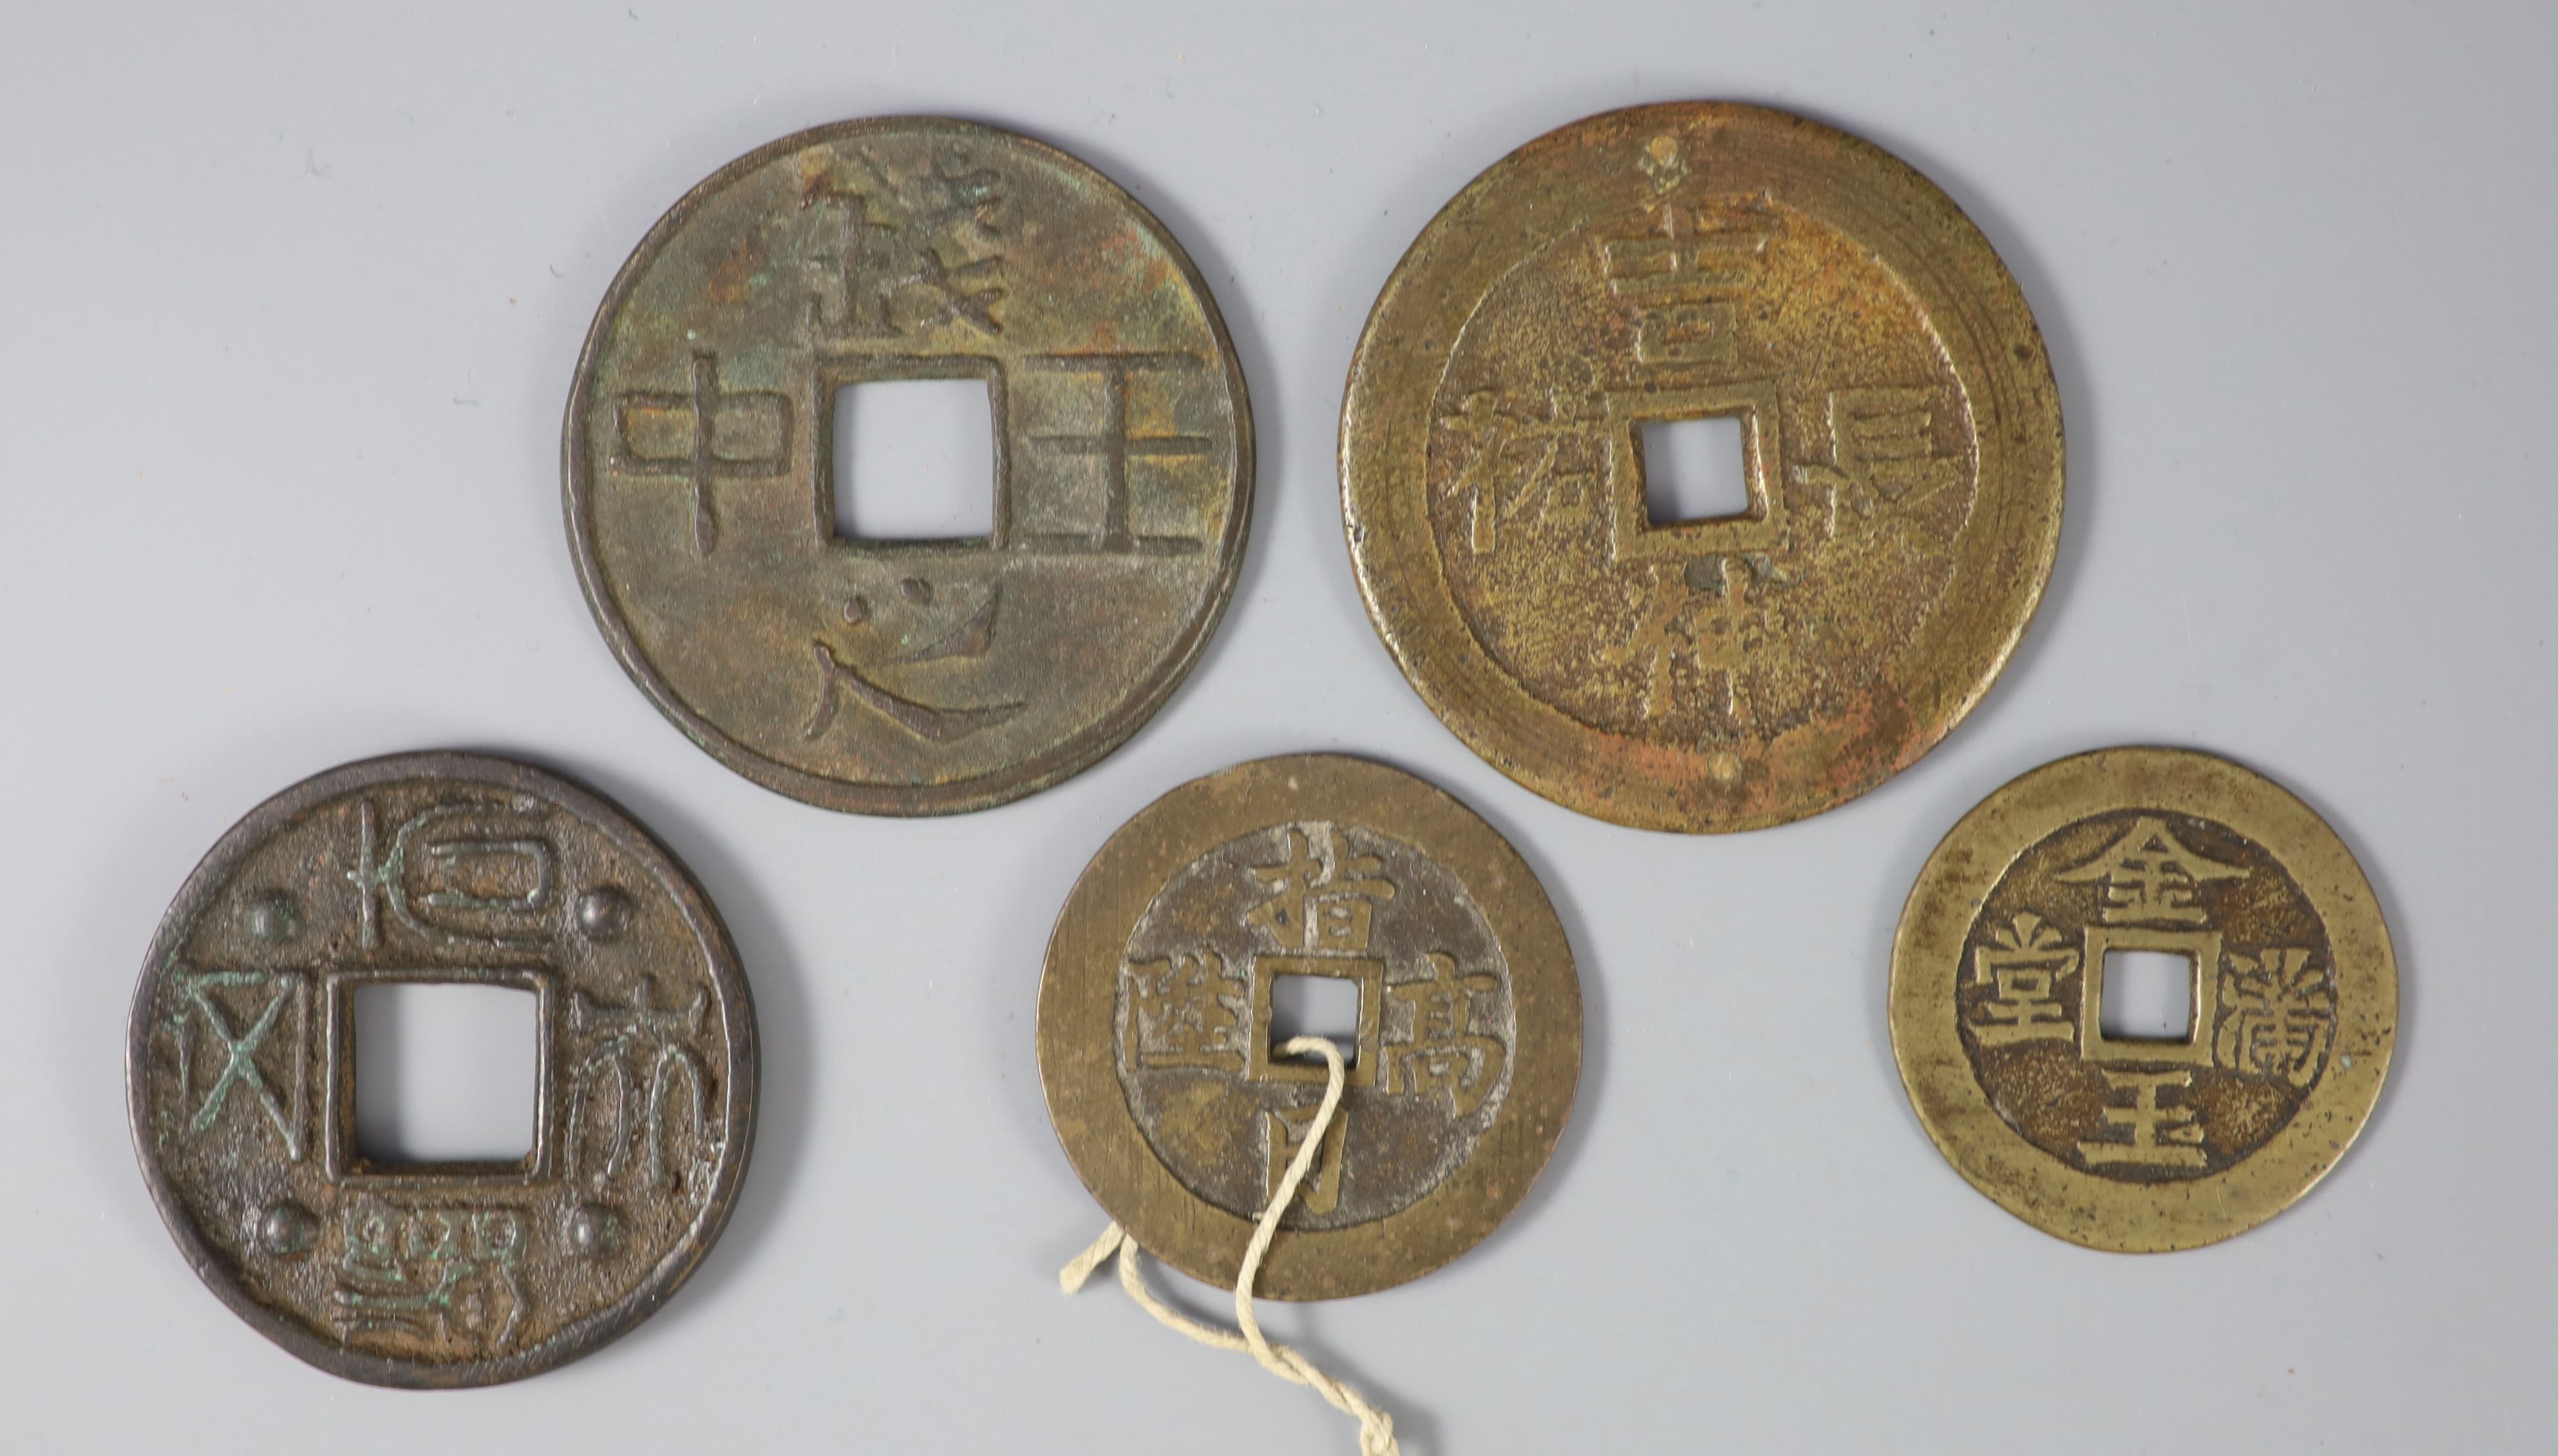 China, 5 large bronze or copper charms or amulets, Qing dynasty, each inscribed with four characters